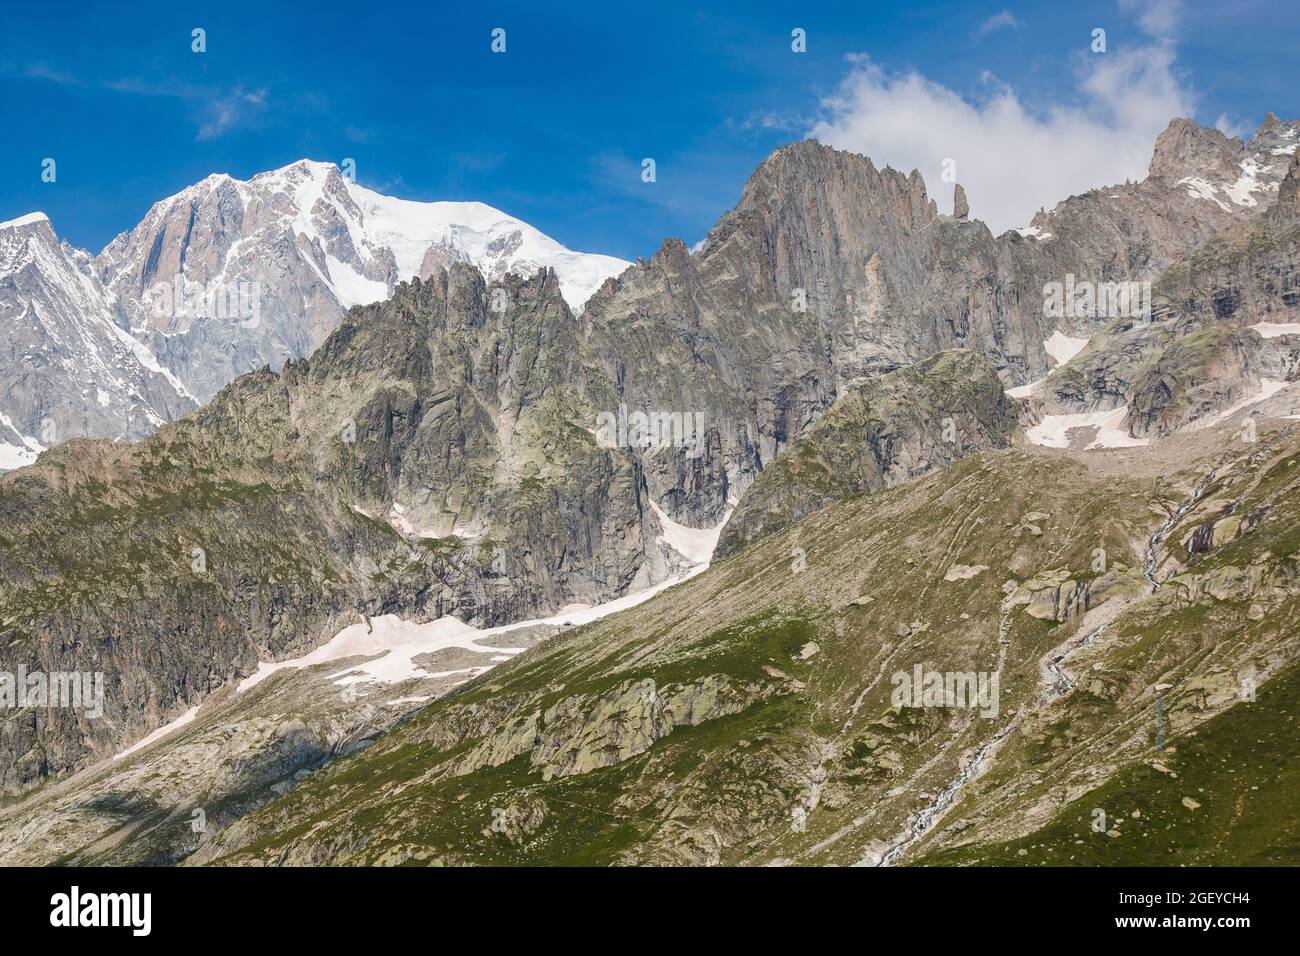 Scenic view of the Italian Alps from the Skyway Monte Bianco cable car that goes up from Courmayeur to Pointe Helbronner, a peak of the Mont Blanc mas Stock Photo